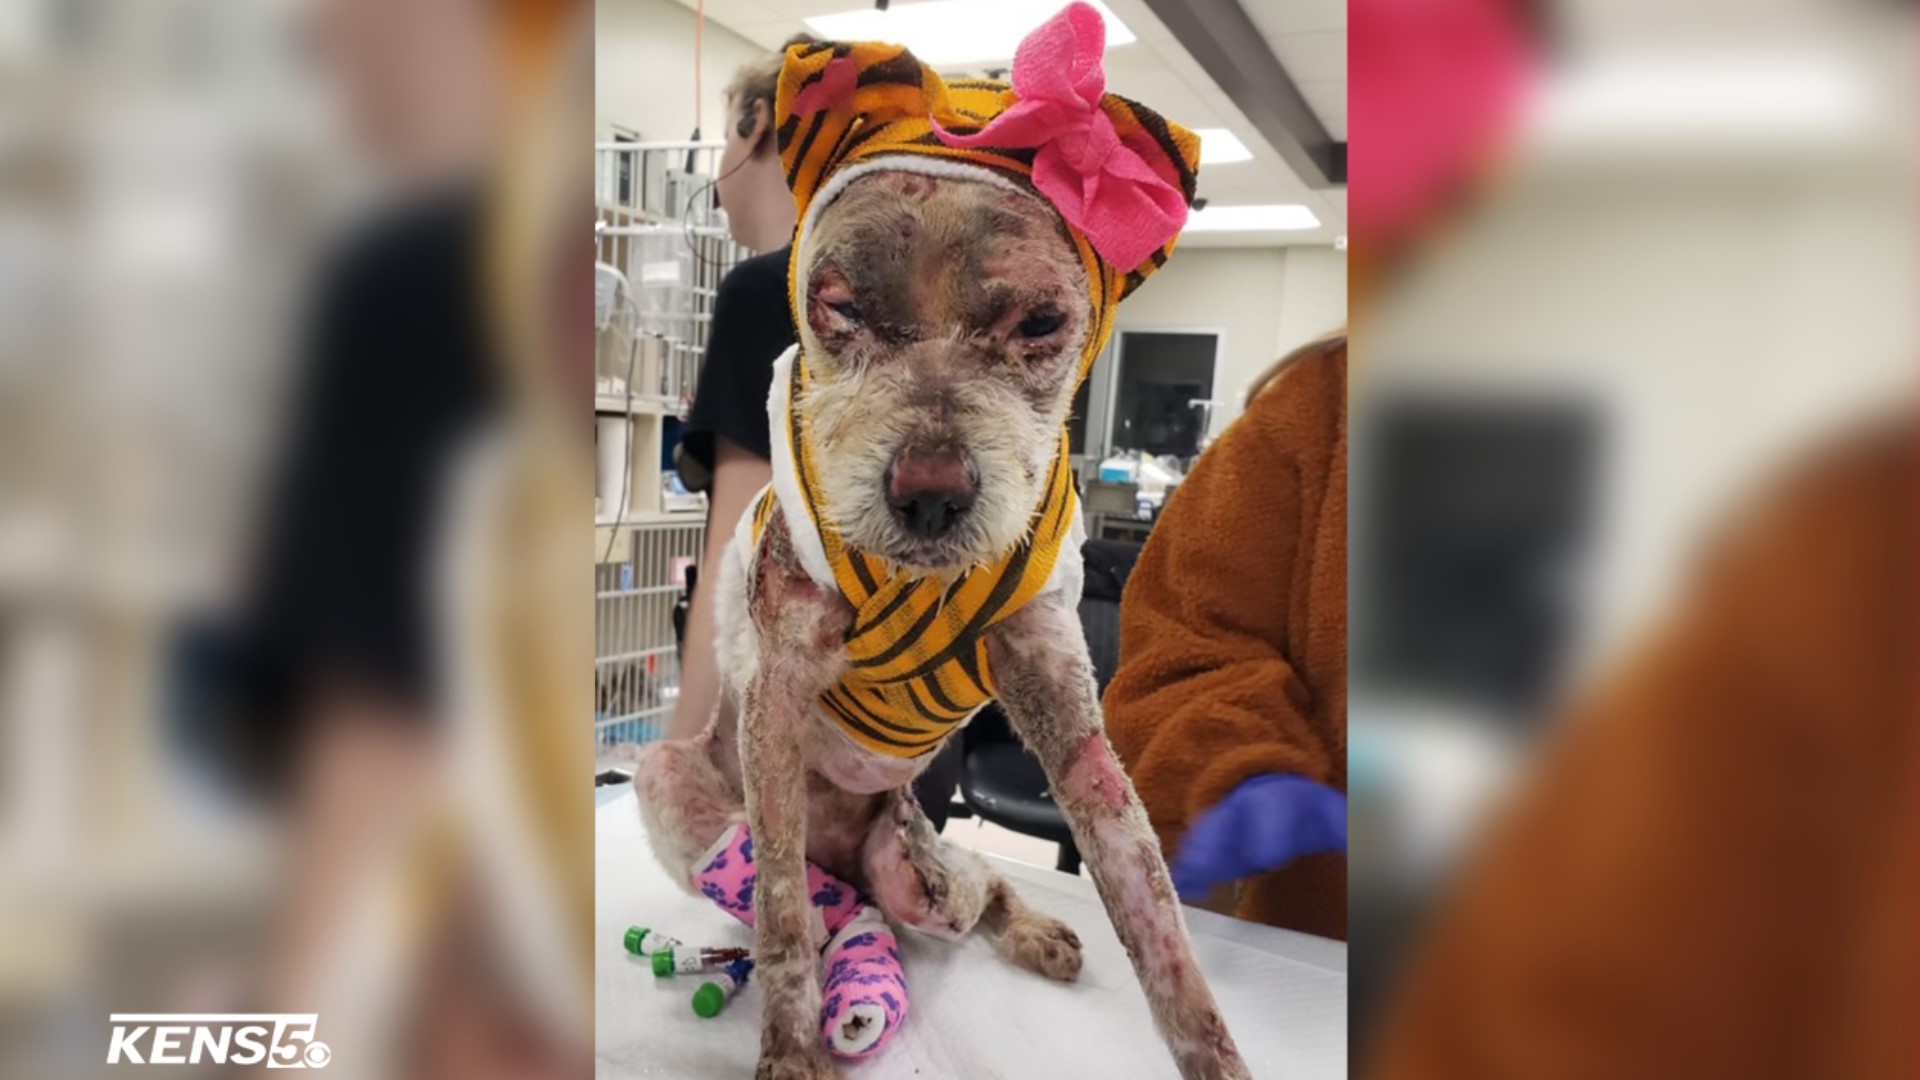 She was named Phoenix by her rescuers who hope that like a Phoenix, she too will rise from the ashes as she recovers from surgeries and treatments.